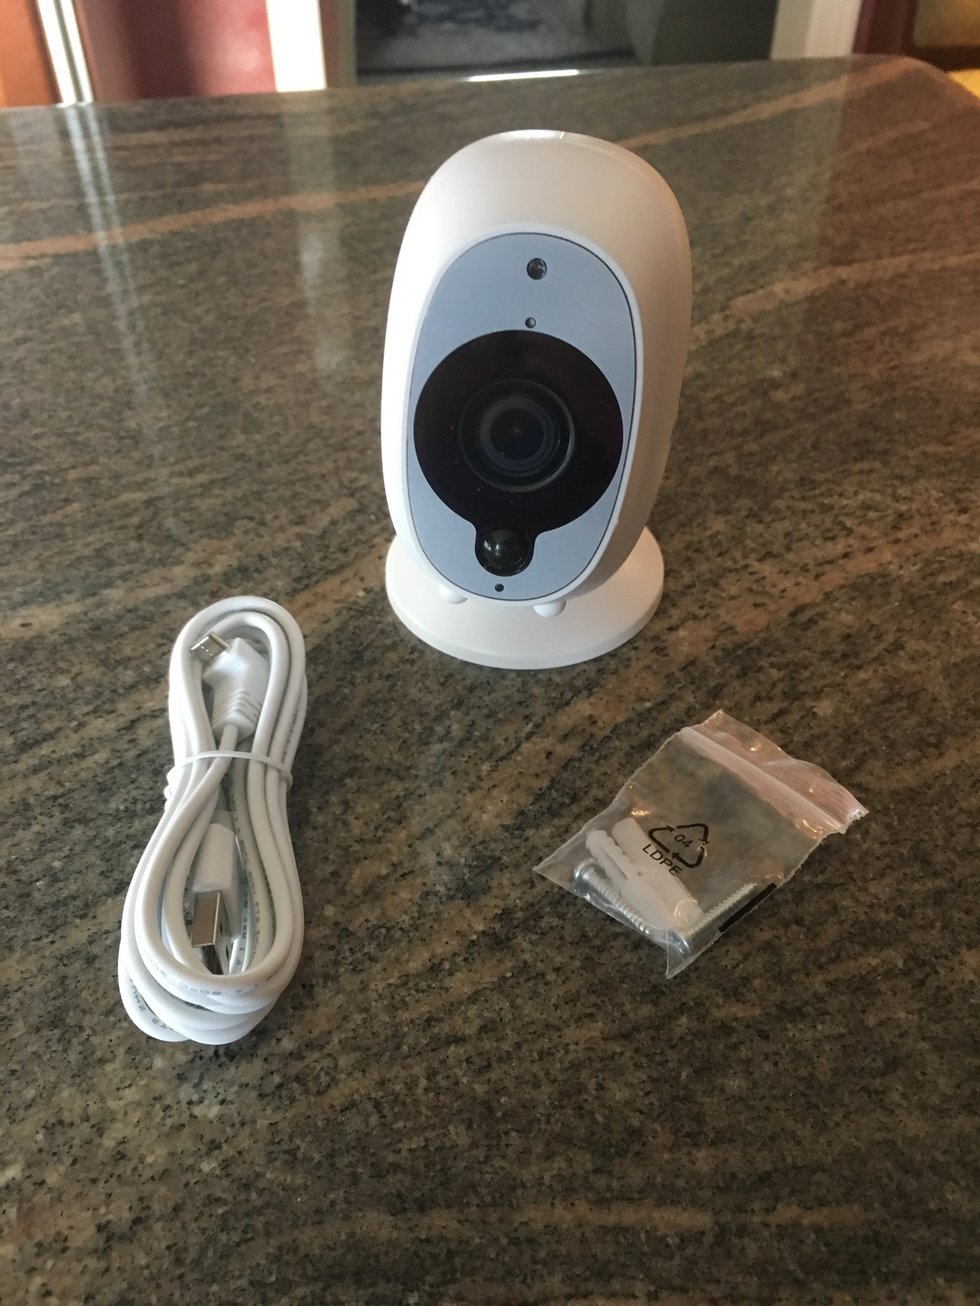 swann smart security camera review